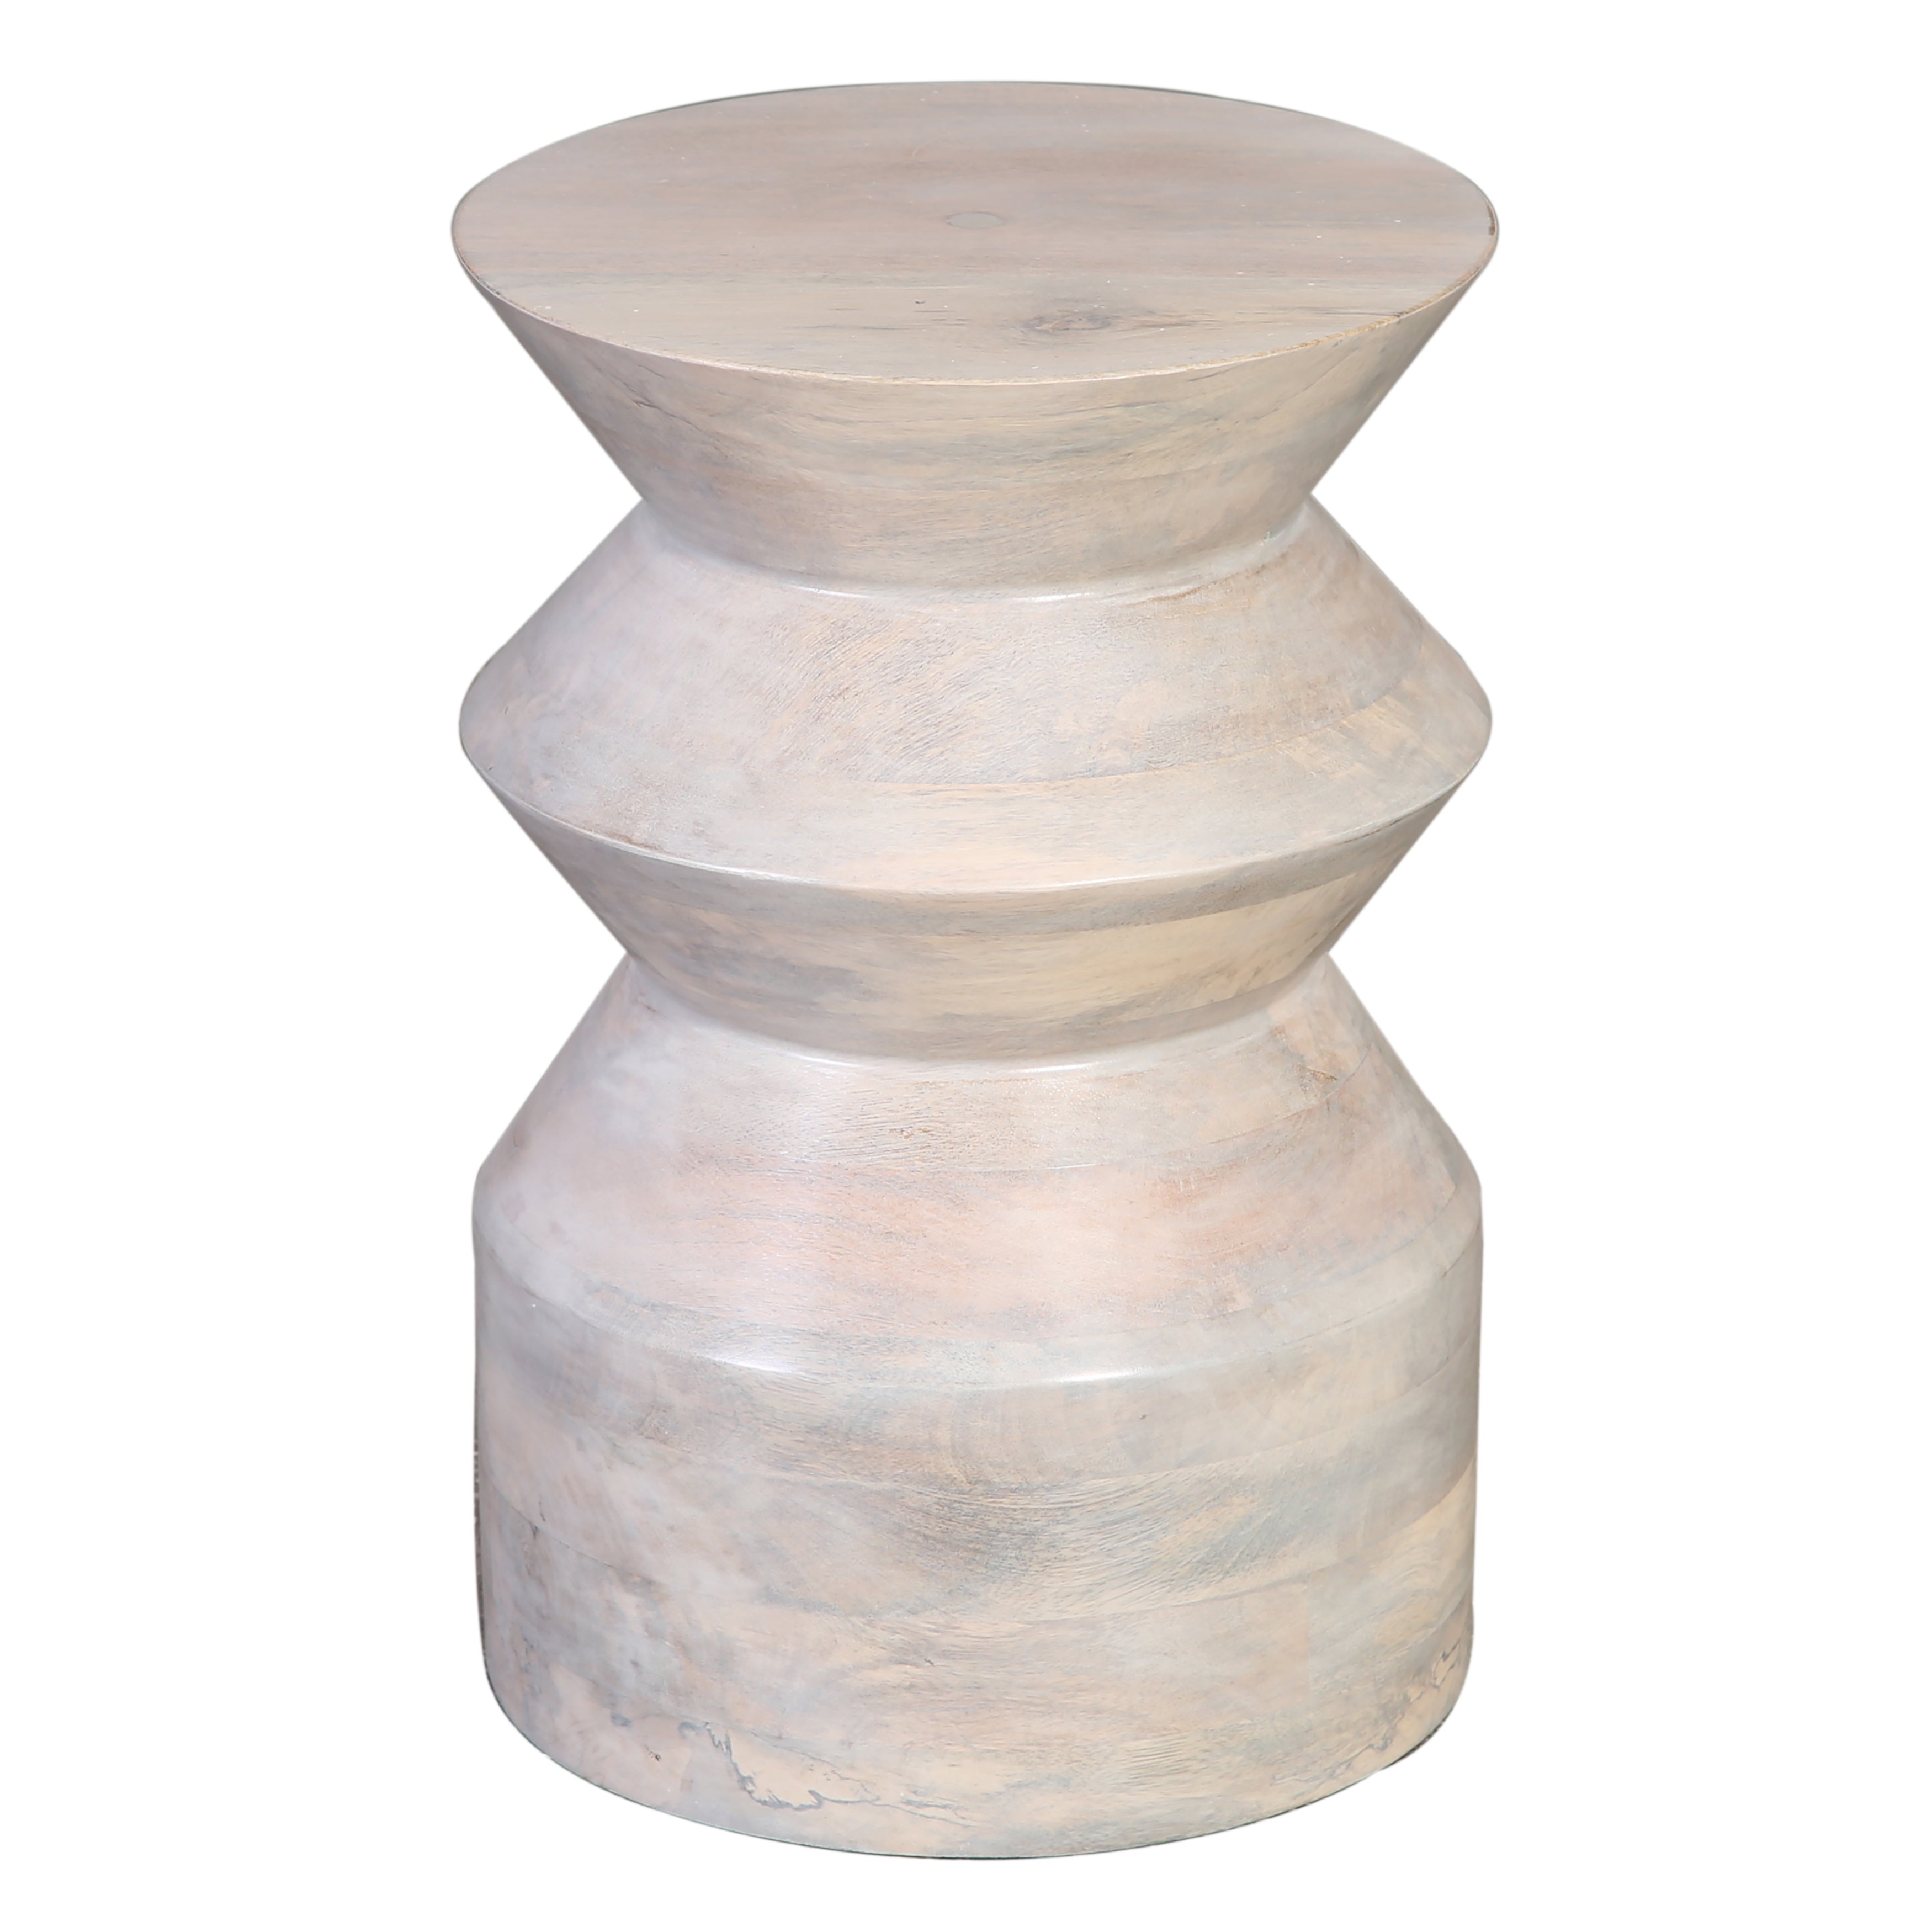 Create a modern statement with our sculpted Decorah Side Table. Handcrafted by skilled artisans in India, this table is made from natural mango wood and finished in a striking whitewash that exudes timeless beauty. It’s winding curves and delicate contours lend visual interest, making it a true work of art for your home. Amethyst Home provides interior design, new home construction design consulting, vintage area rugs, and lighting in the Seattle metro area.